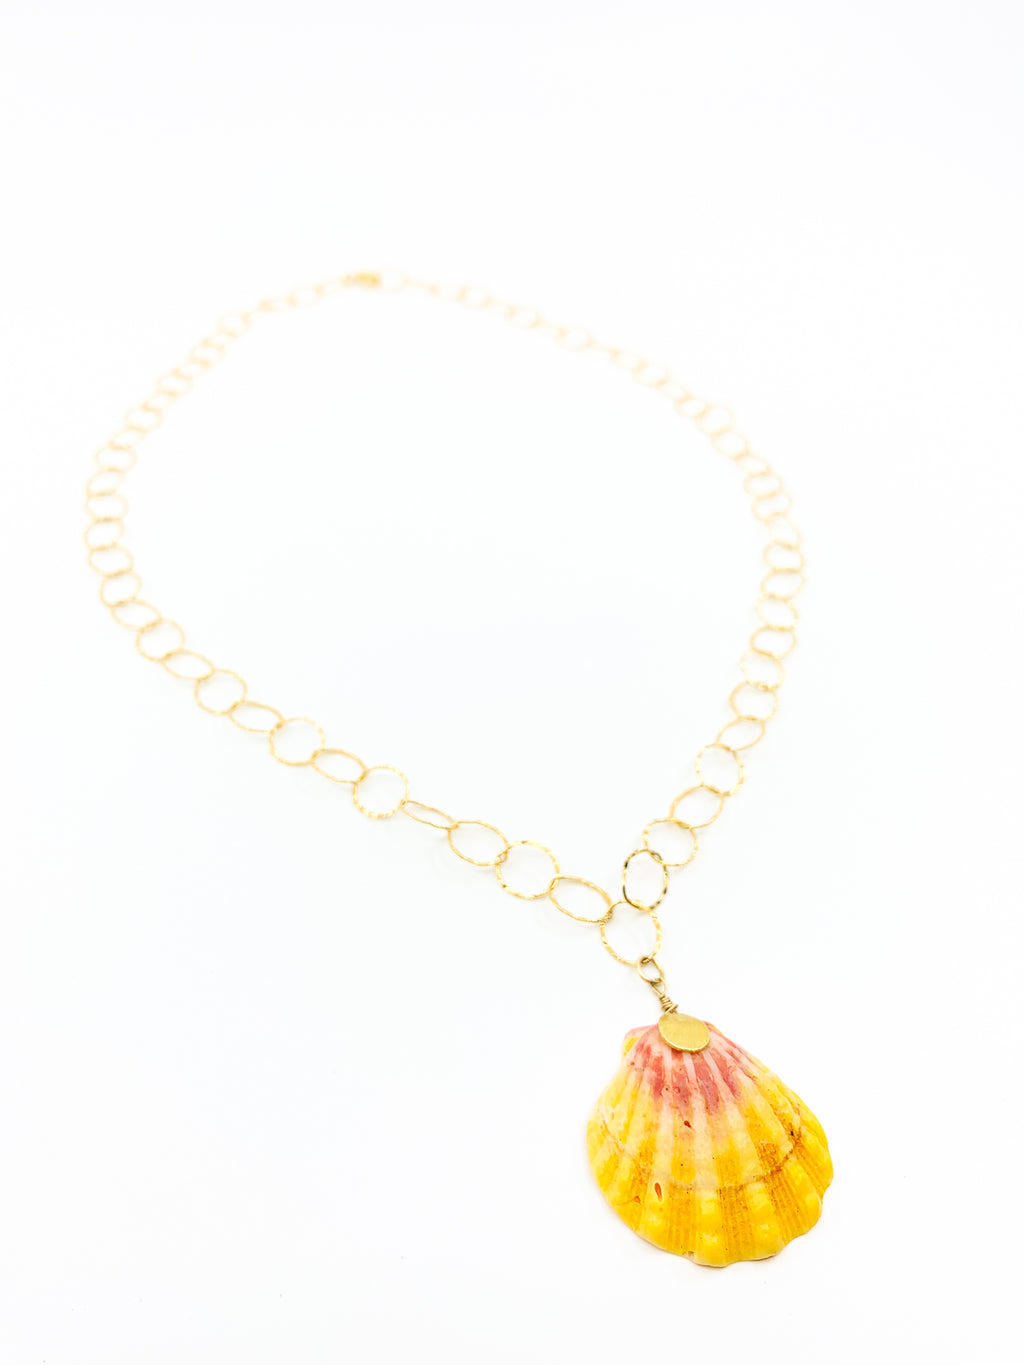 Hawaiian sunrise shell gold chain necklace by eve black jewelry made in Hawaii